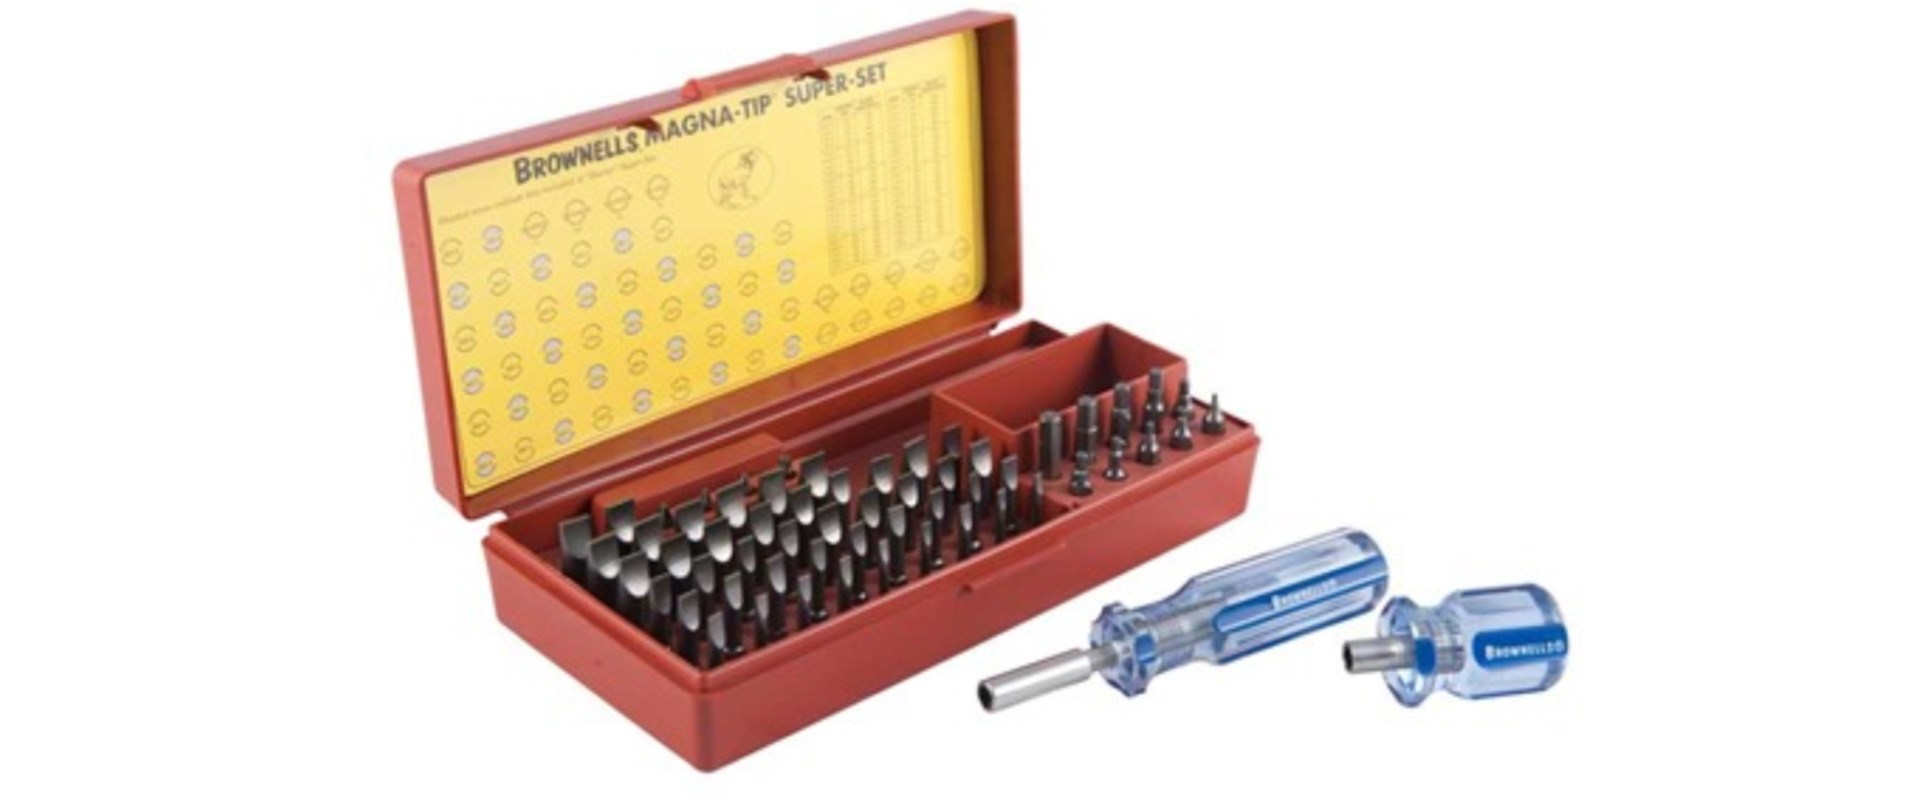 red box filled with screwdriver tips metal bits brownell's magna tip set